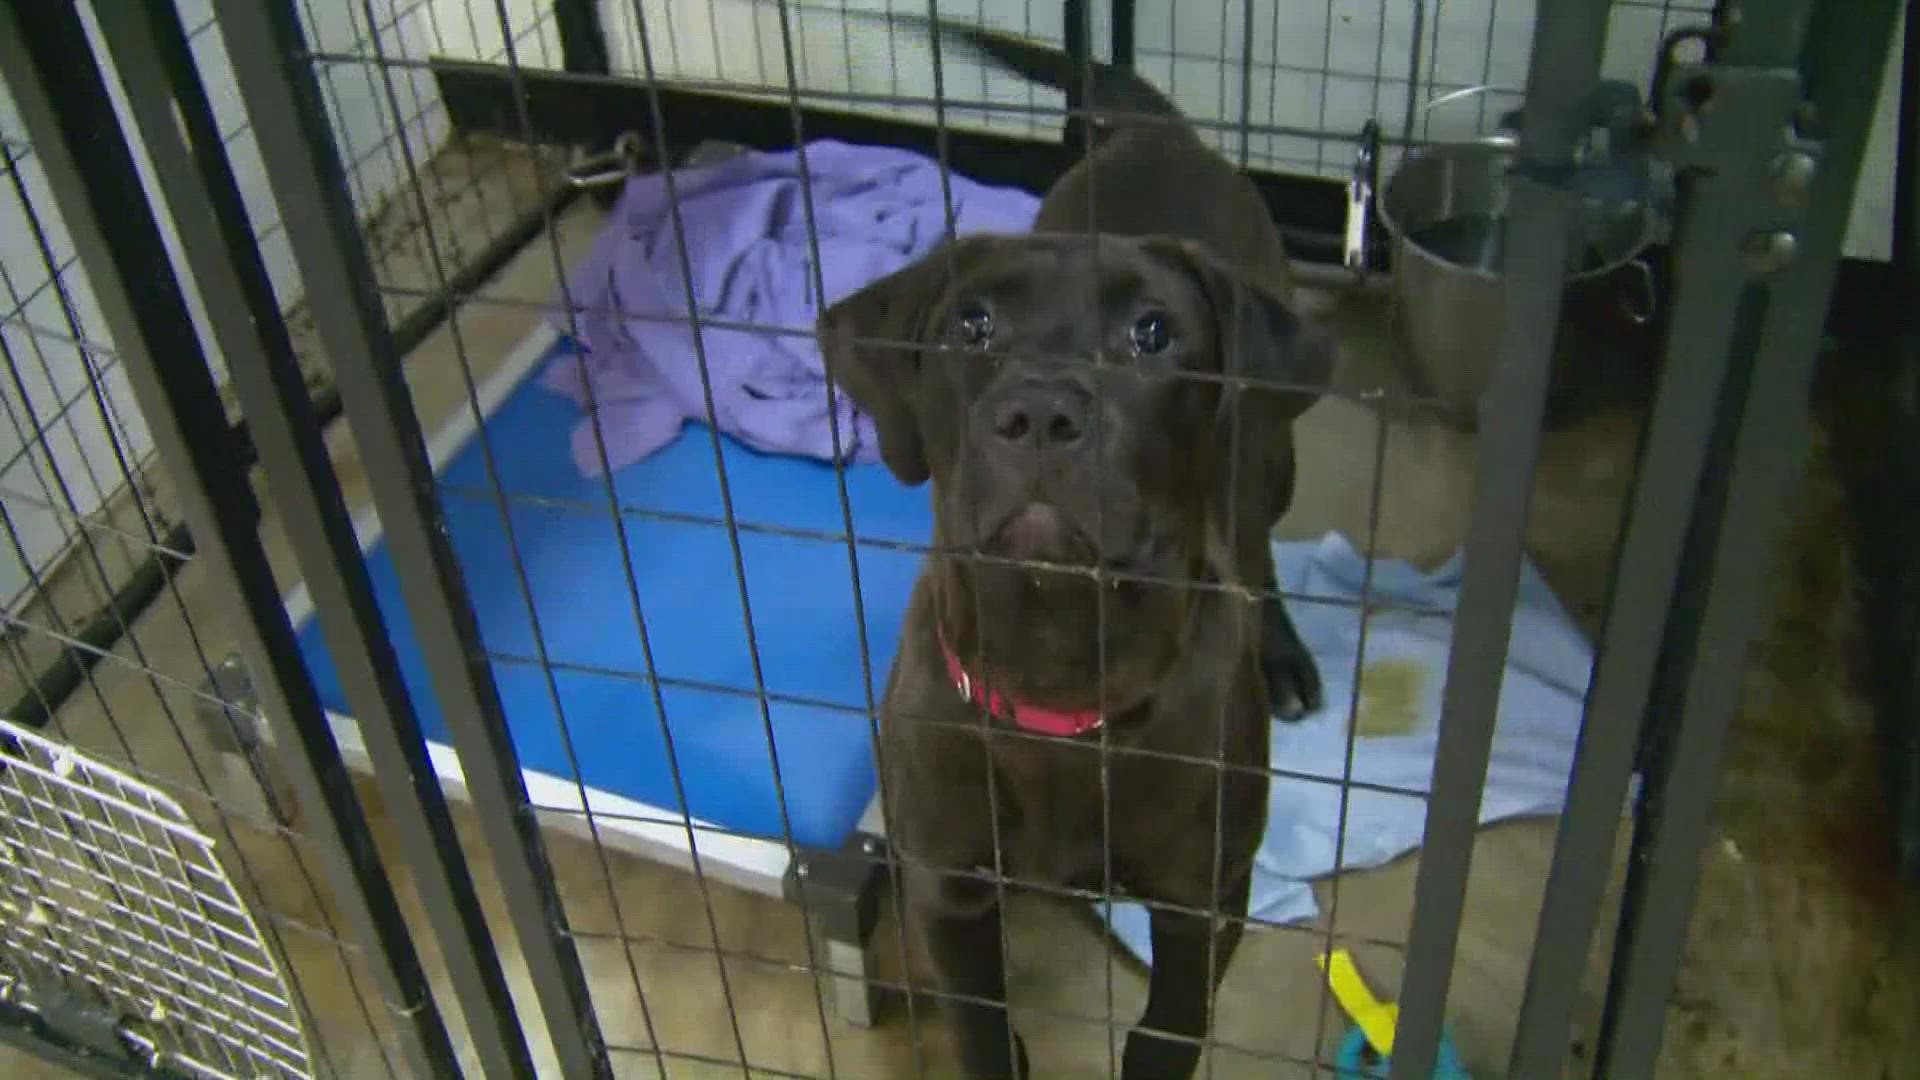 San Antonio Pets Alive! says 25 dogs and puppies are on the Animal Care Service's euthanasia list on Friday.